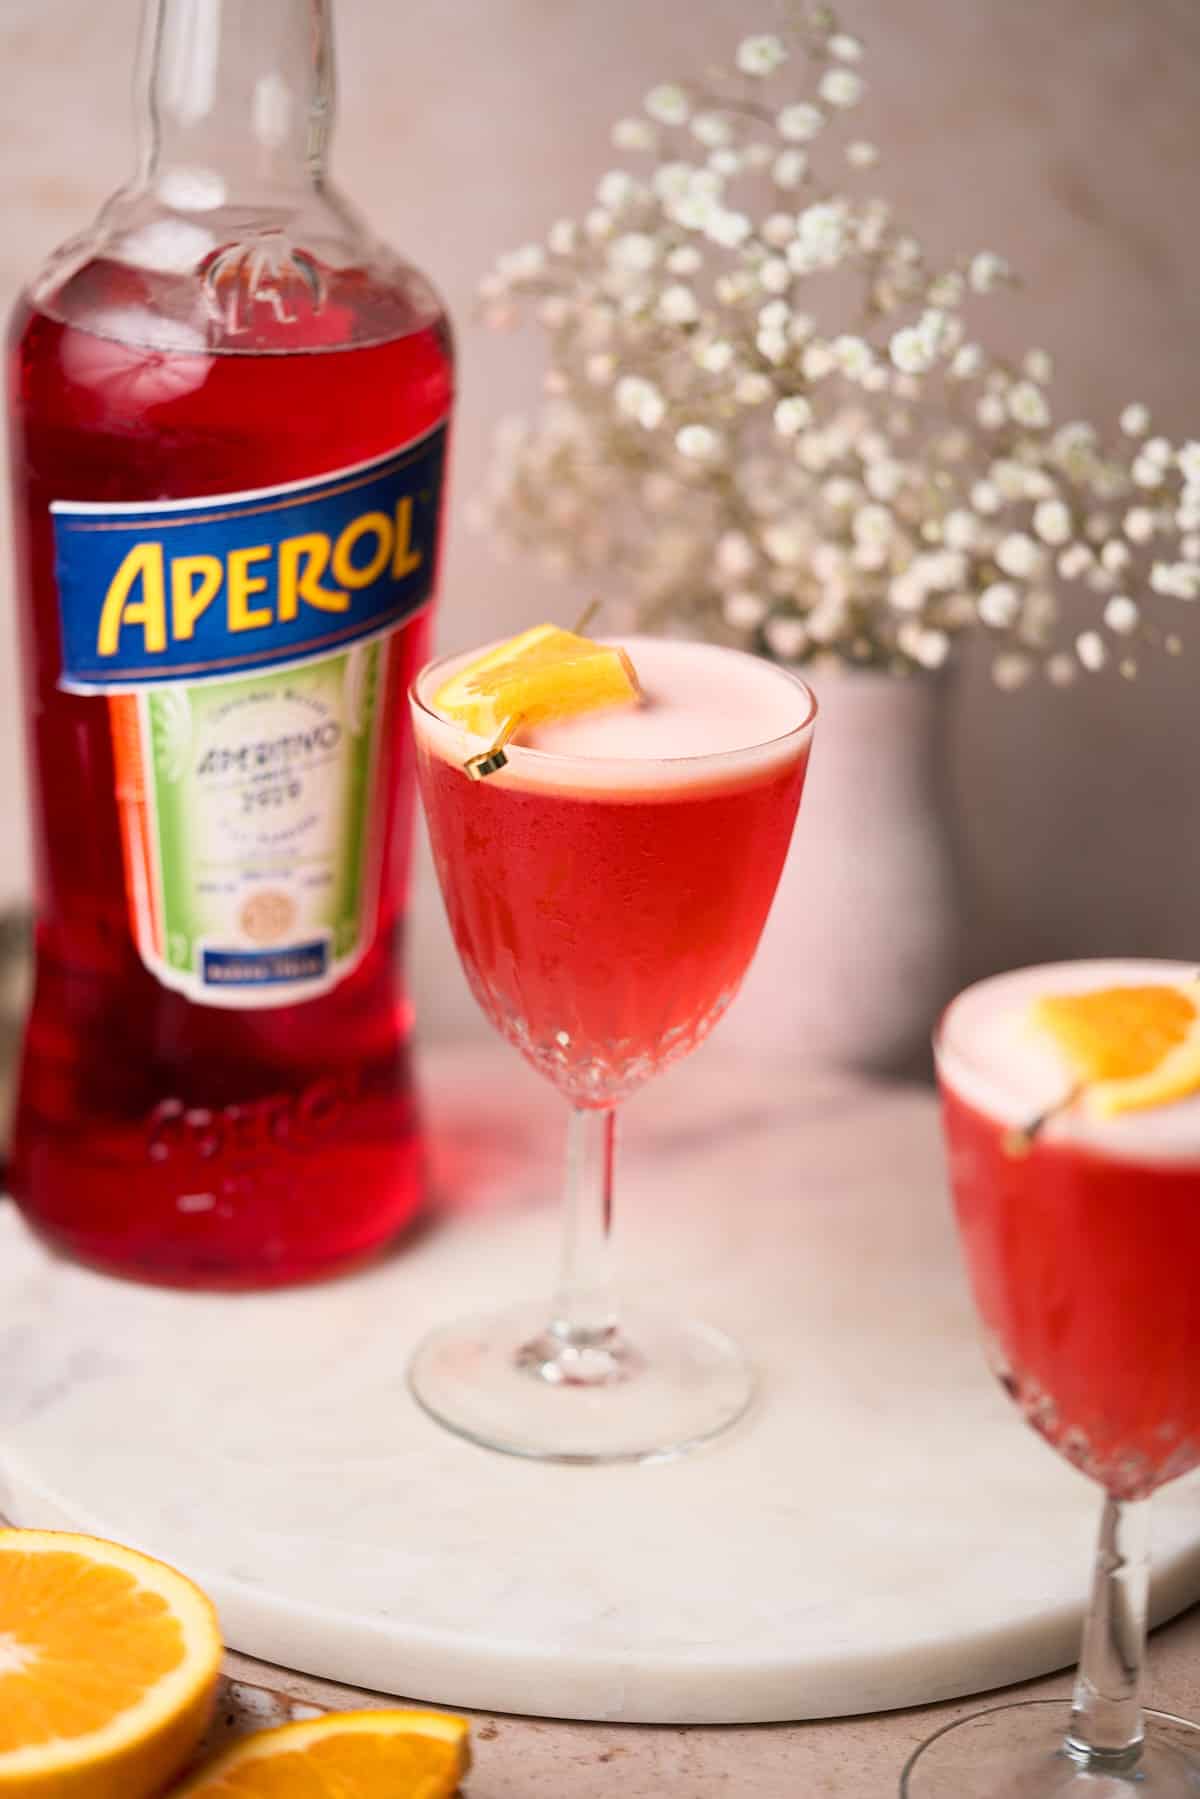 two aperol sour cocktails with a foamy top, and a small wedge of orange on top of the cocktail with a bottle of Aperol and white baby's breath flowers in the background.